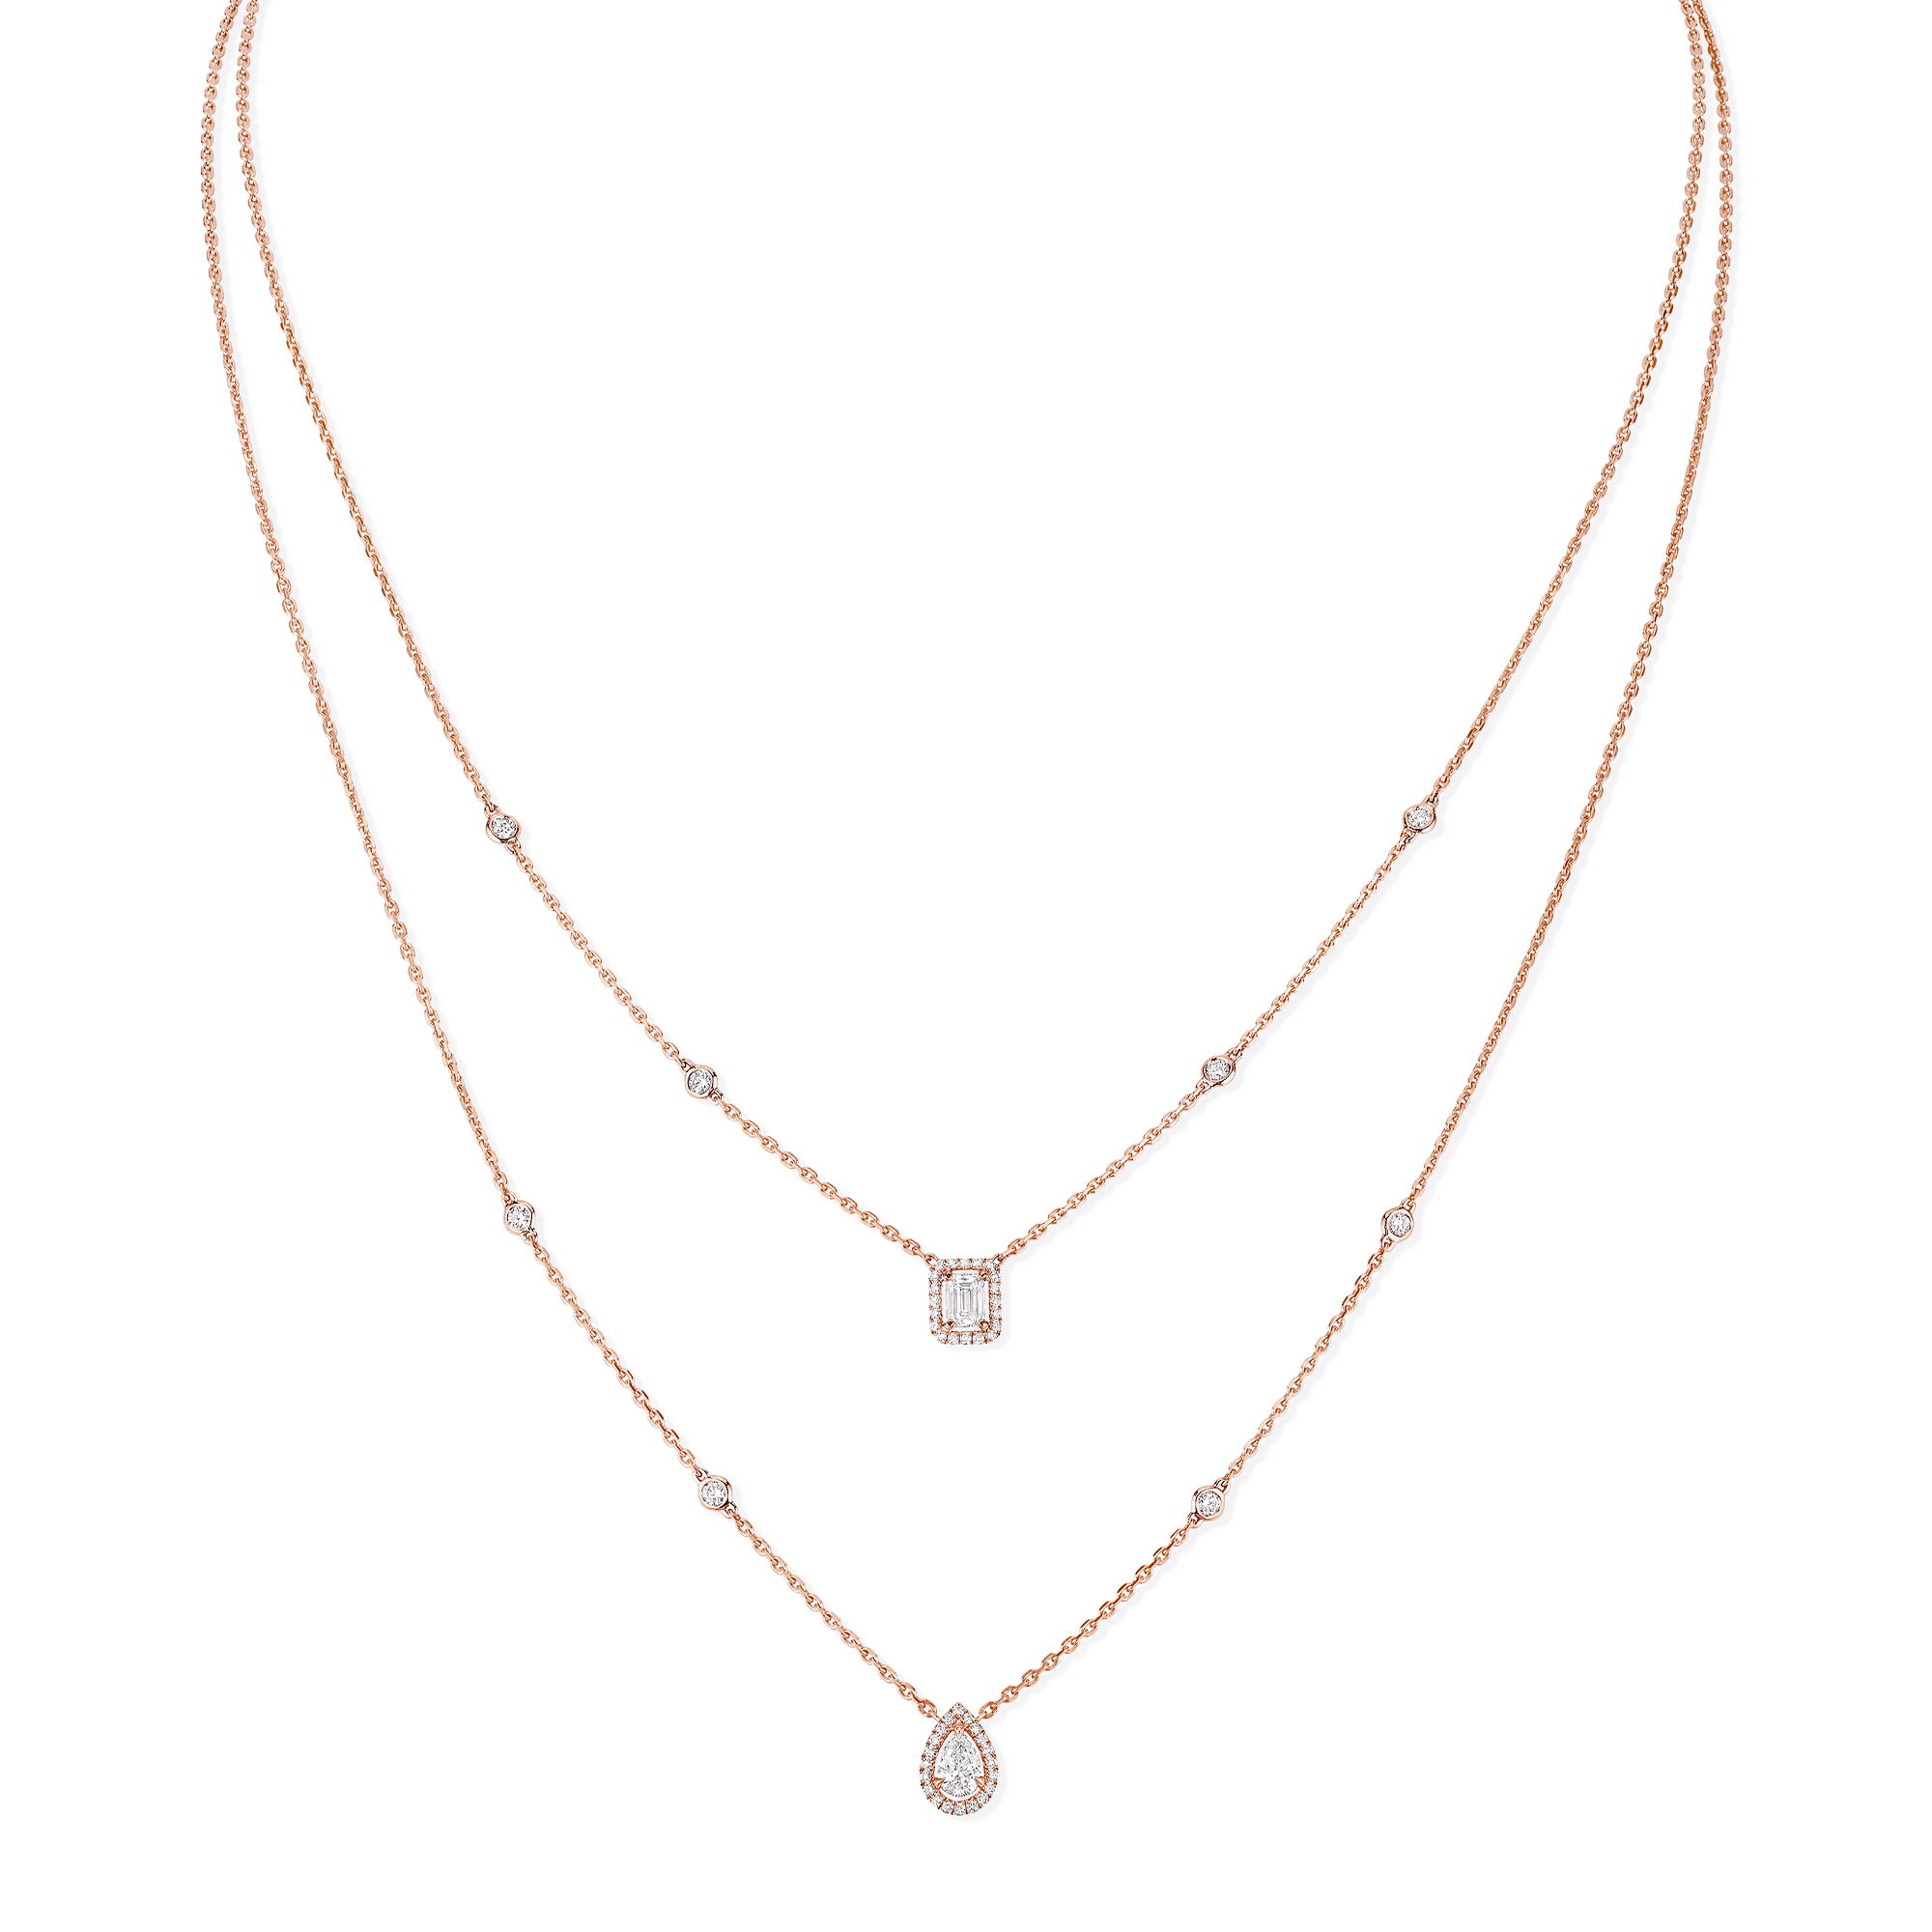 My Twin 2 Rows 18ct Pink Gold Diamond Necklace